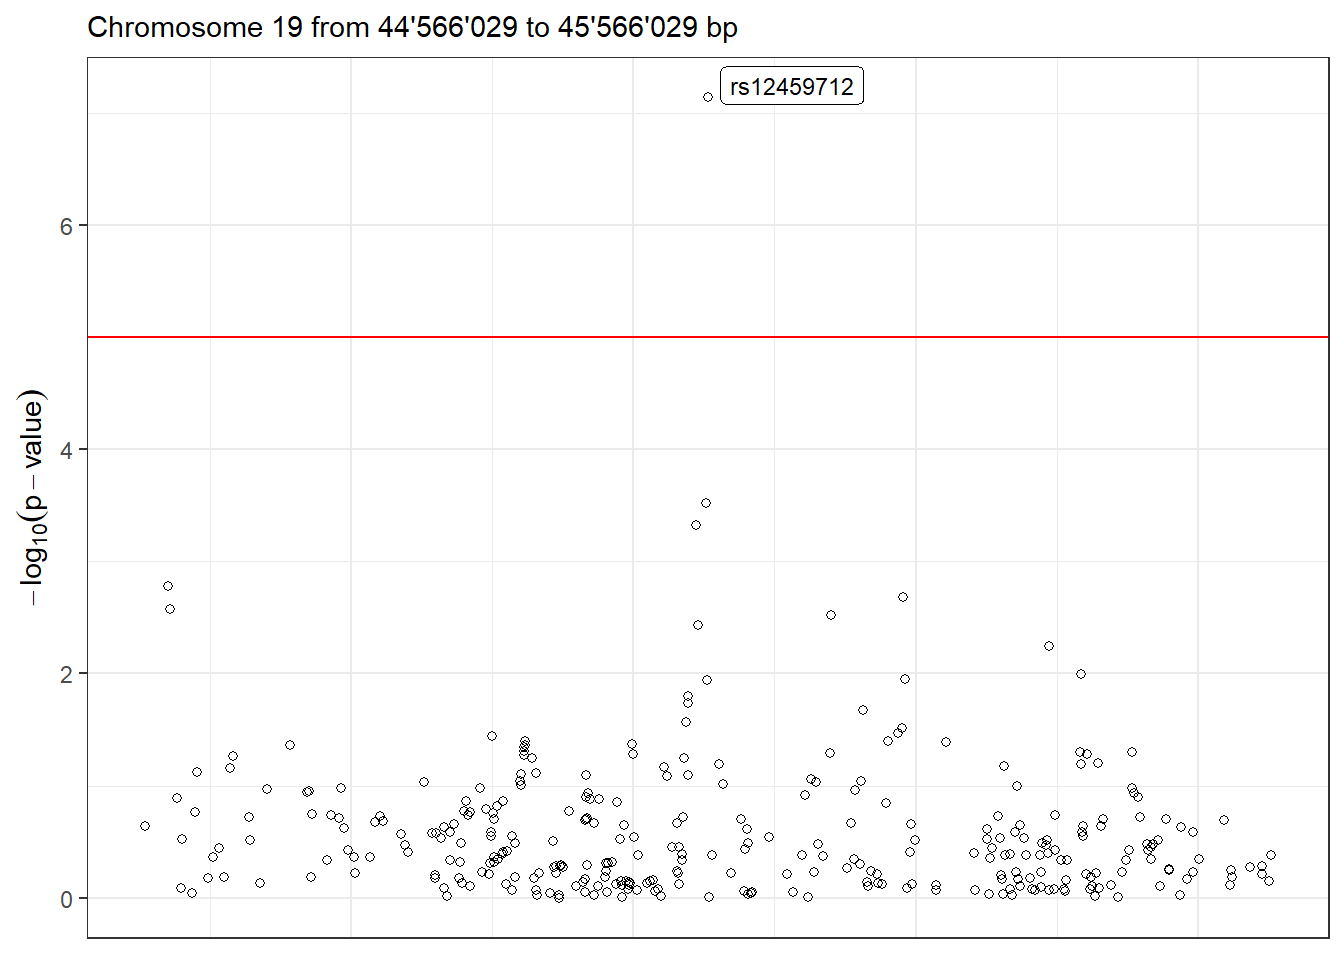 LocusZoom plot of the meta-analysis results.